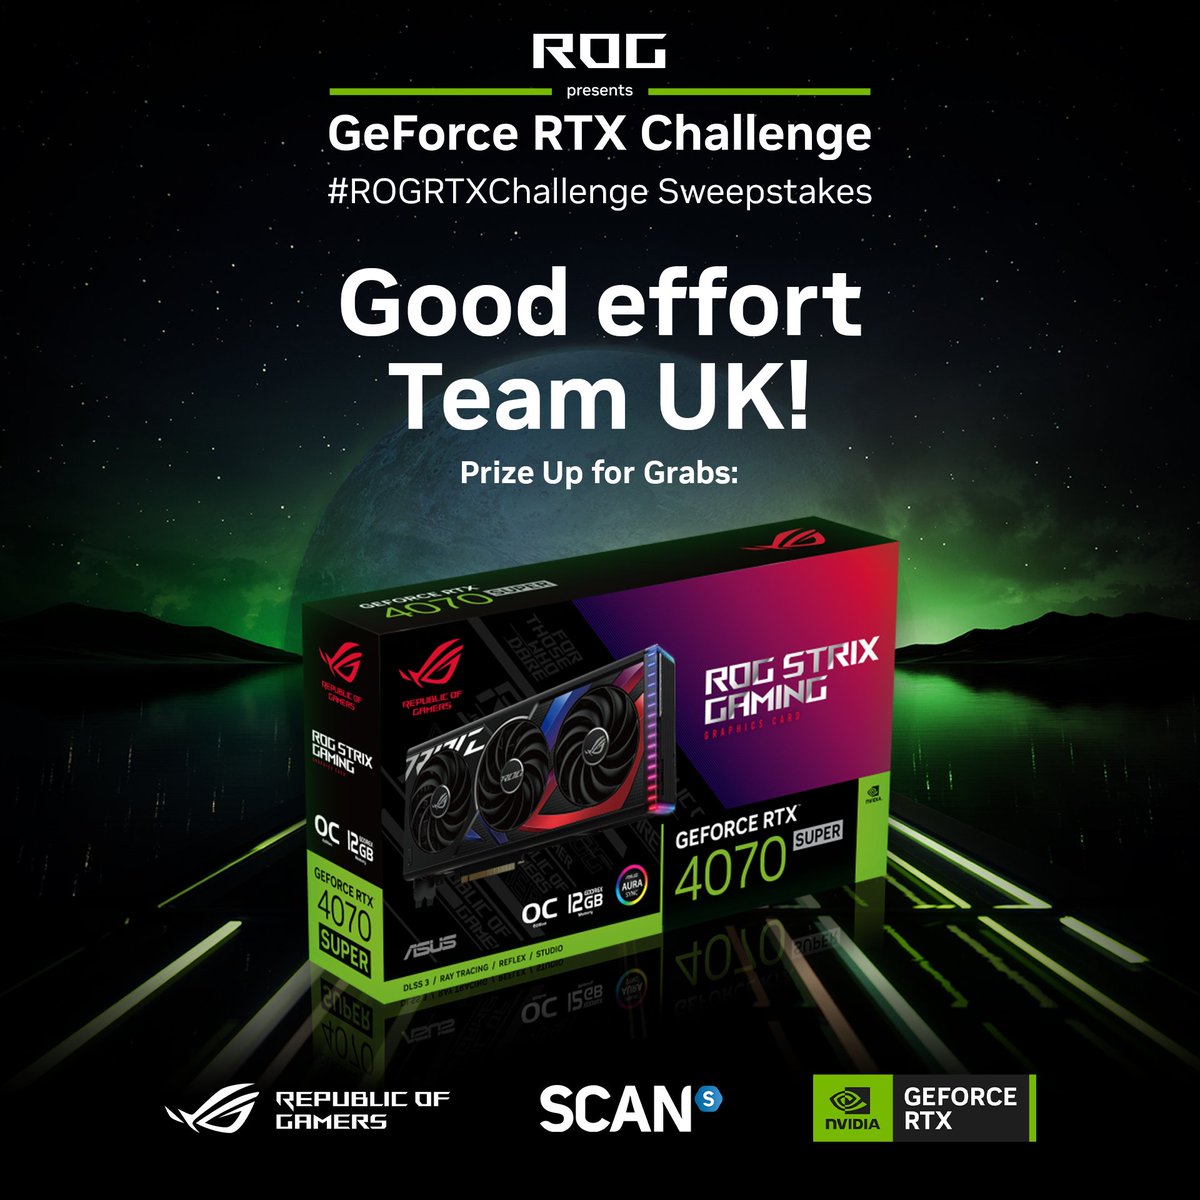 A valiant effort by Team UK in the #ROGRTXChallenge 👏 Unfortunately it wasn't enough to secure the trophy this time! BUT they have earned an ROG RTX 4070 Super for you!

To be in with a chance of winning it:
1. Like this post
2. Comment with #ROGRTXChallenge